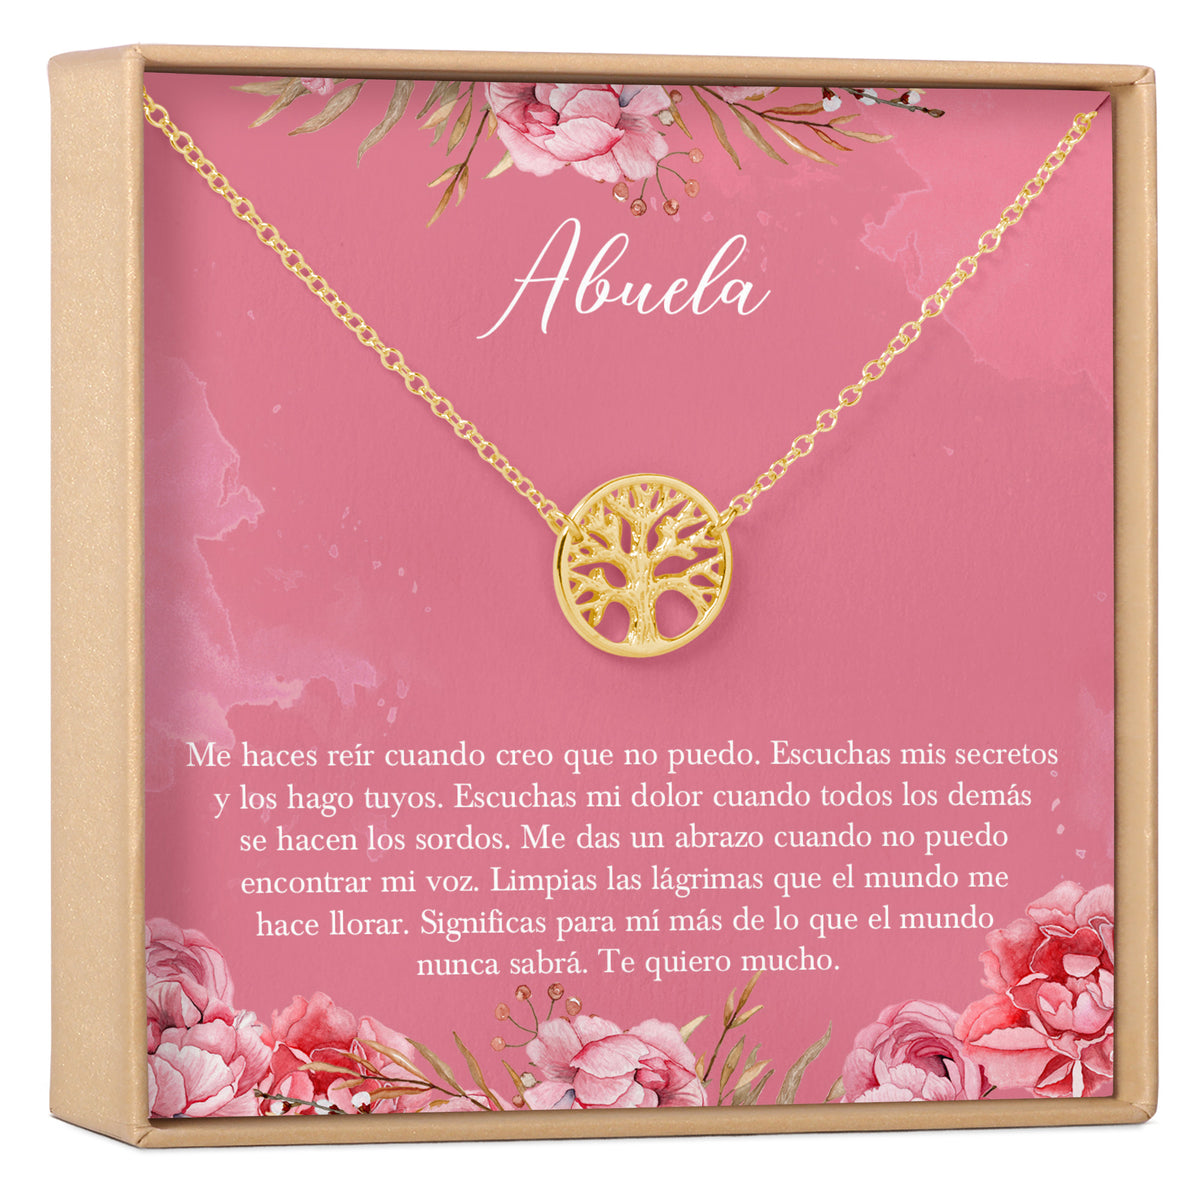 Abuela Necklace, Multiple Styles